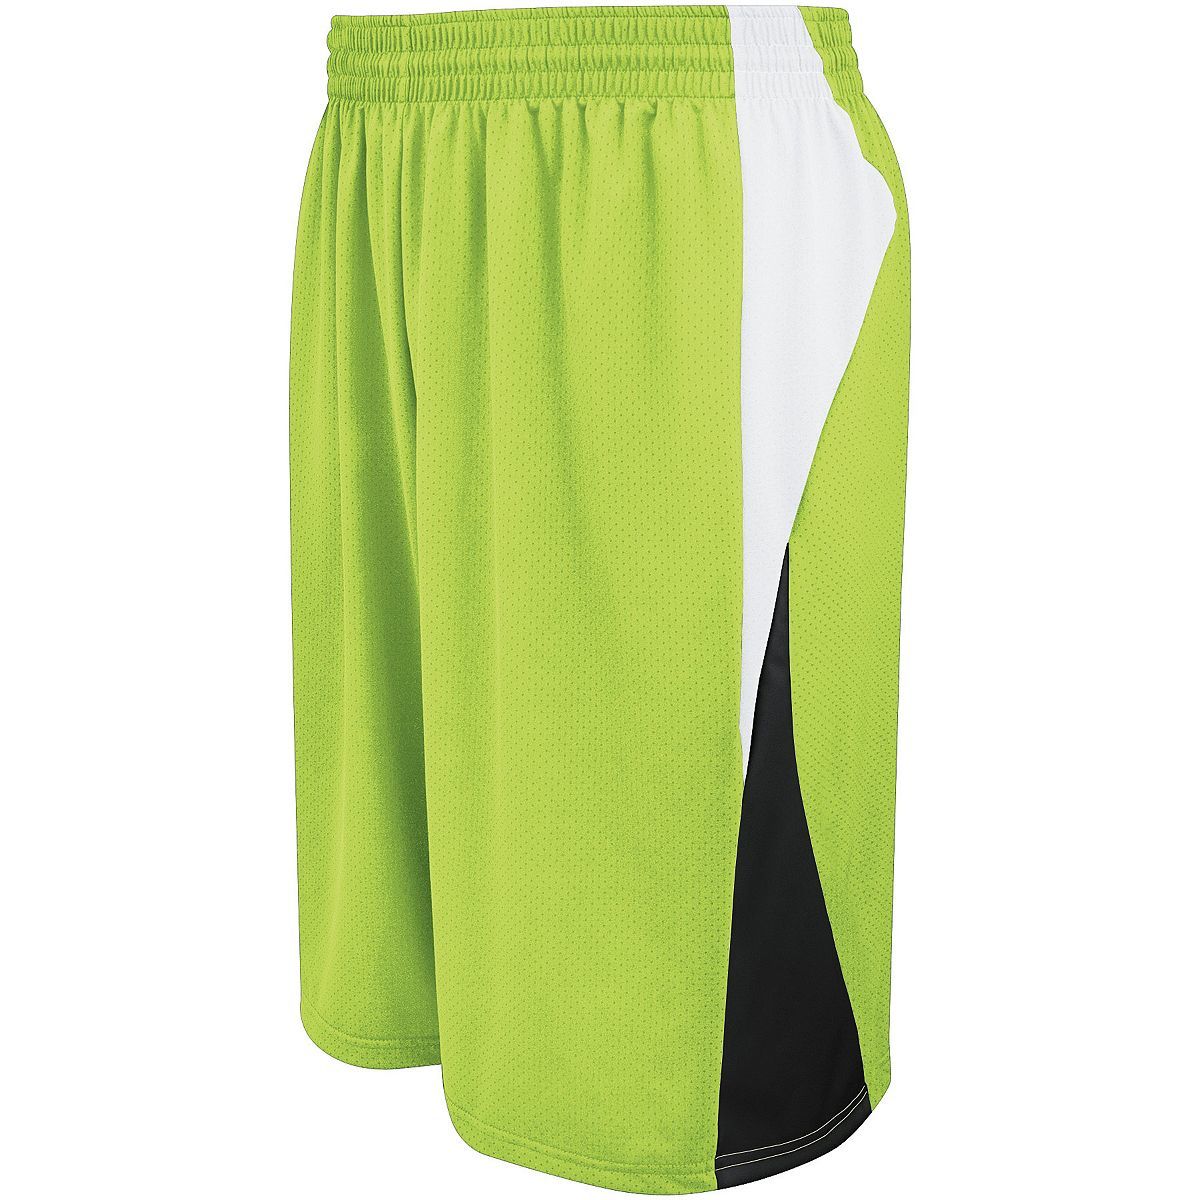 Holloway Campus Reversible Shorts in Lime/White/Black  -Part of the Adult, Adult-Shorts, Basketball, Holloway, All-Sports, All-Sports-1 product lines at KanaleyCreations.com